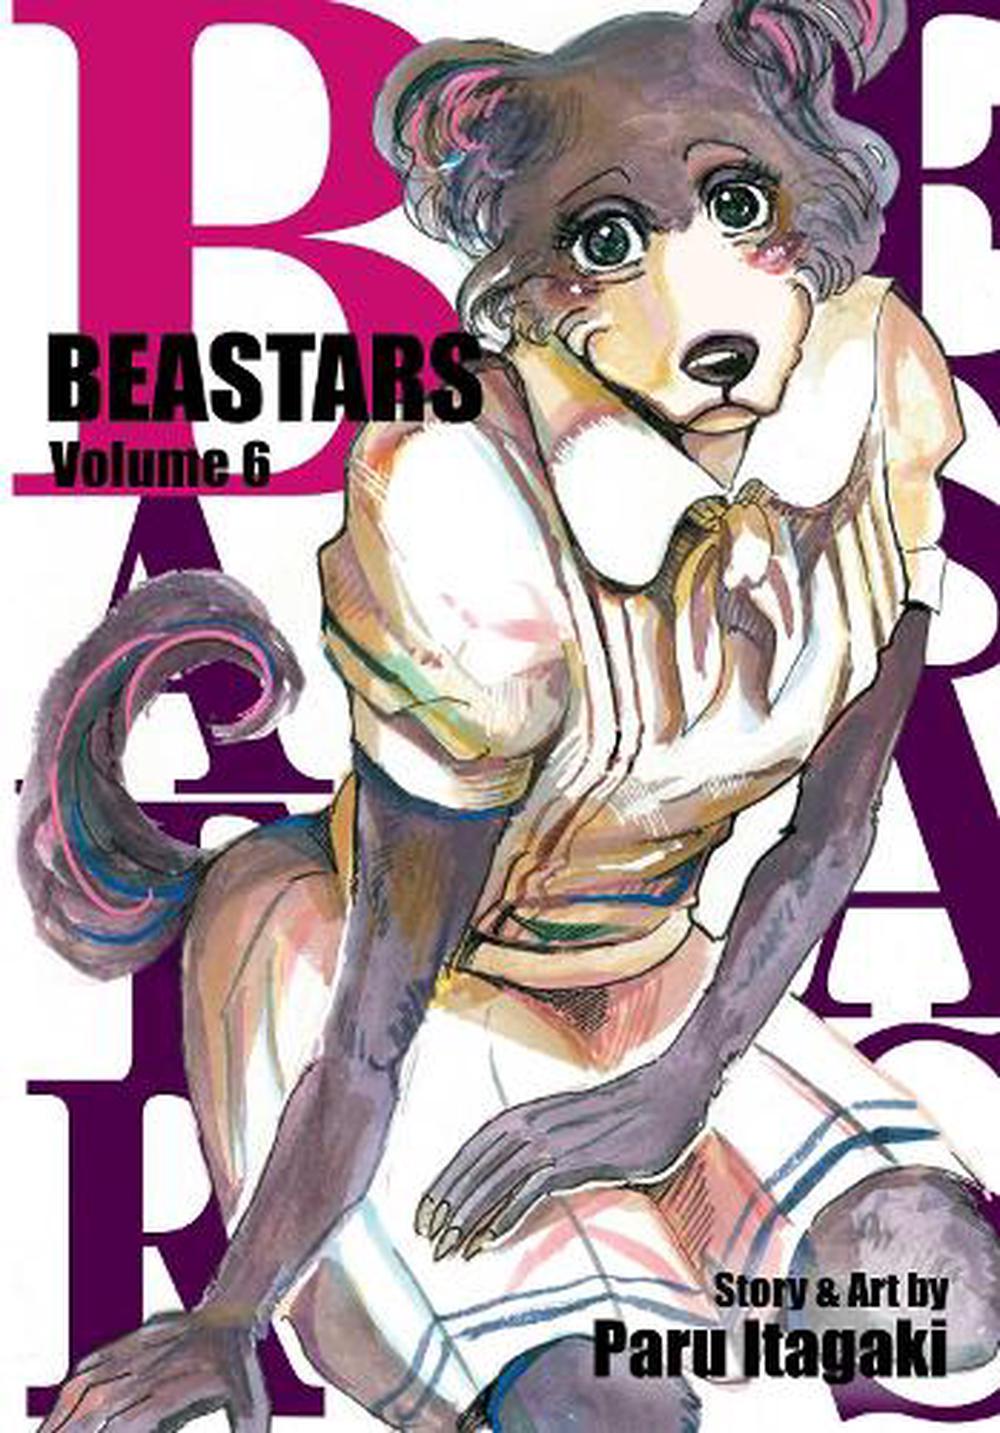 Beastars Vol 6 By Paru Itagaki Paperback Buy Online At The Nile